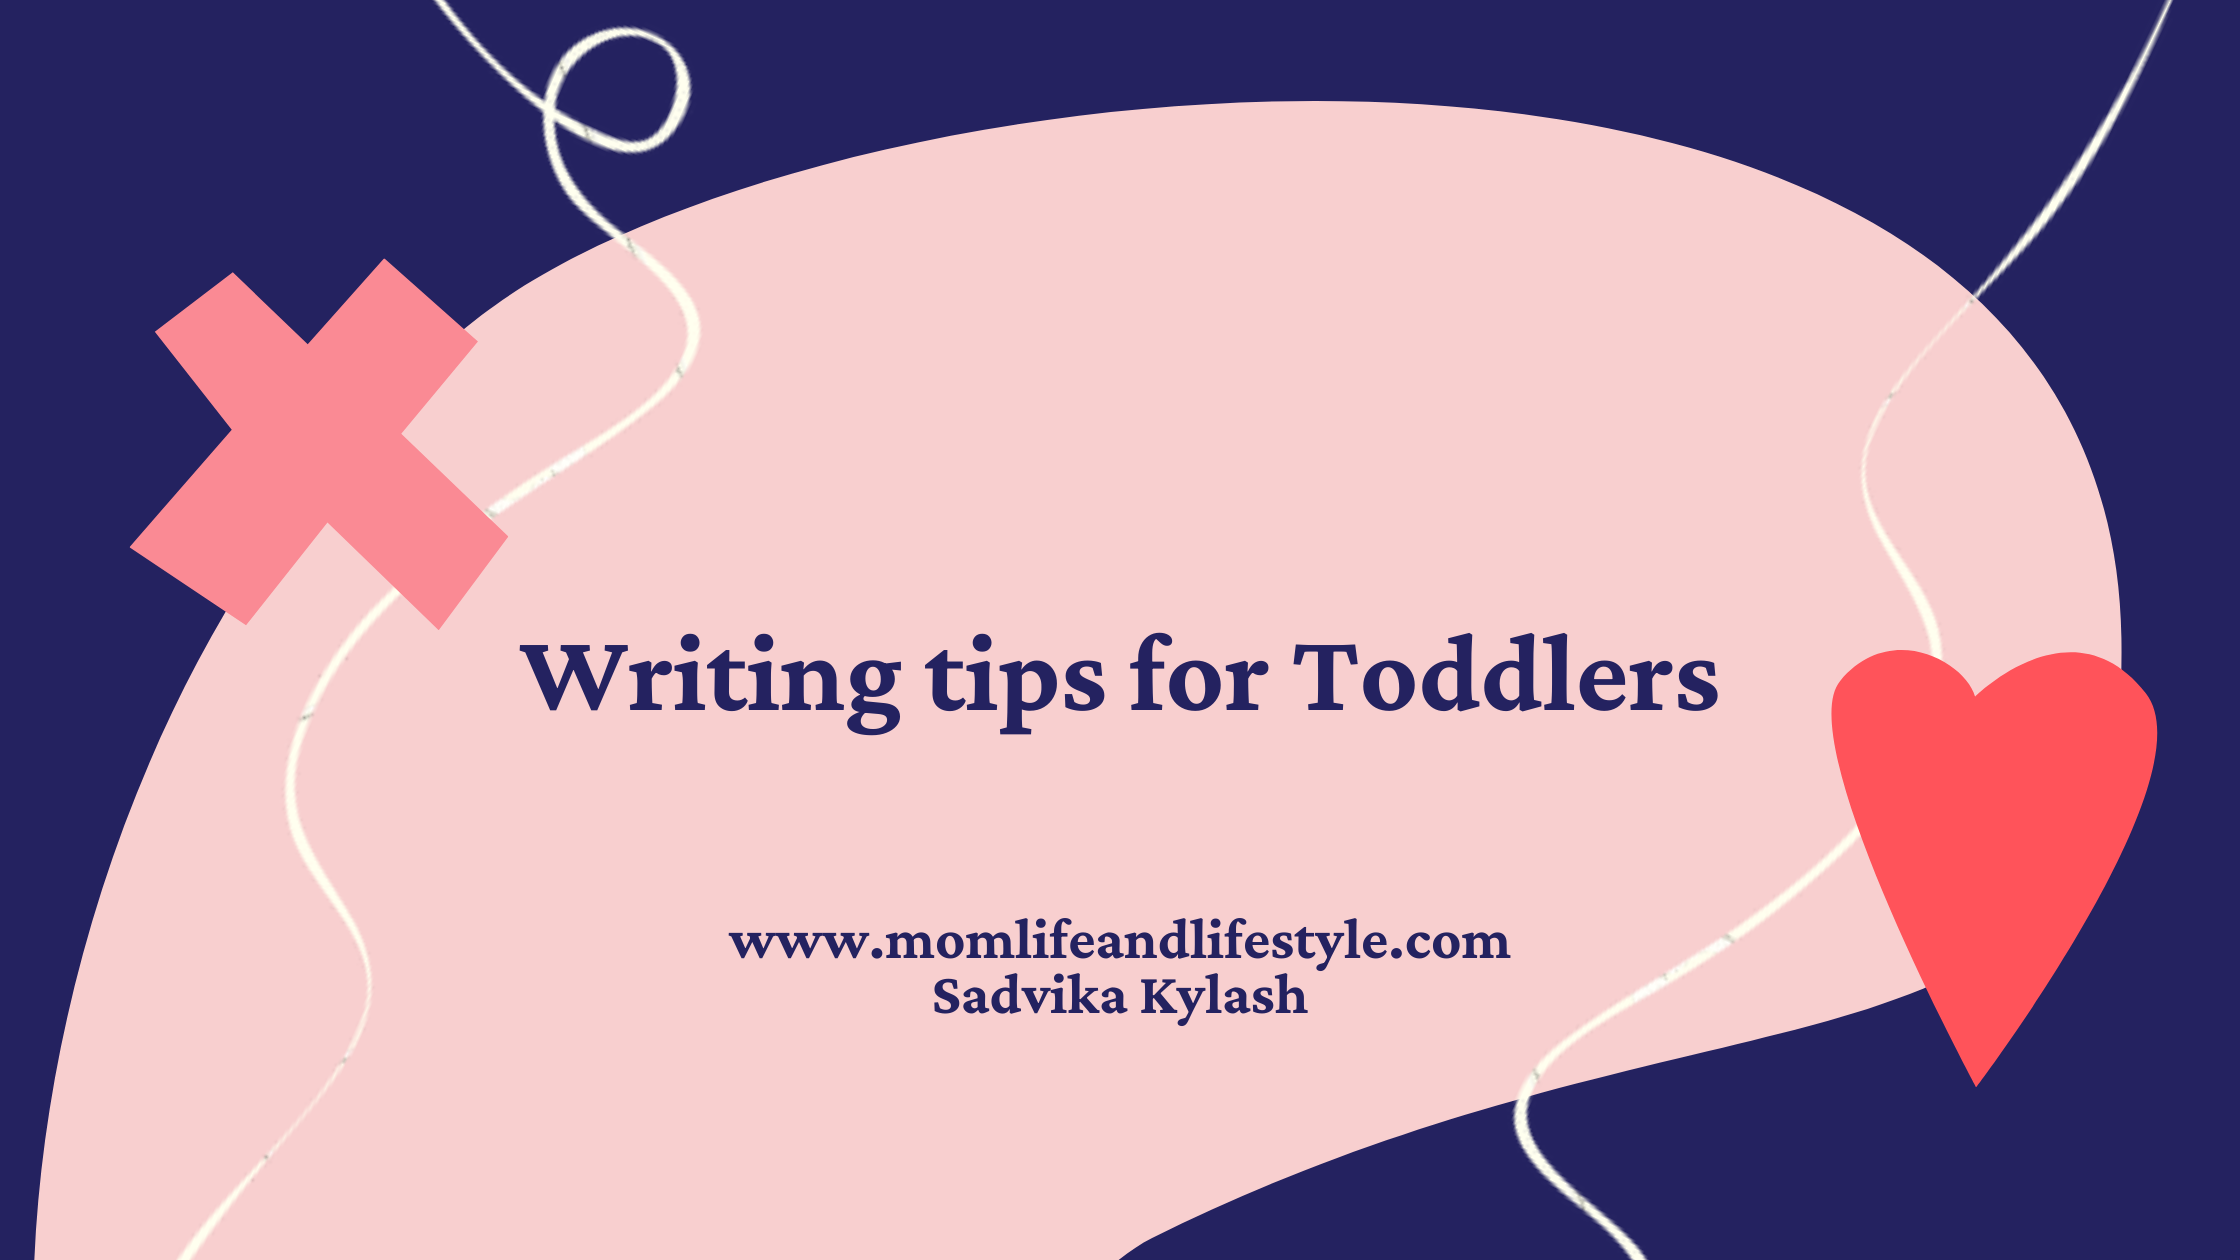 Writing tips for toddlers